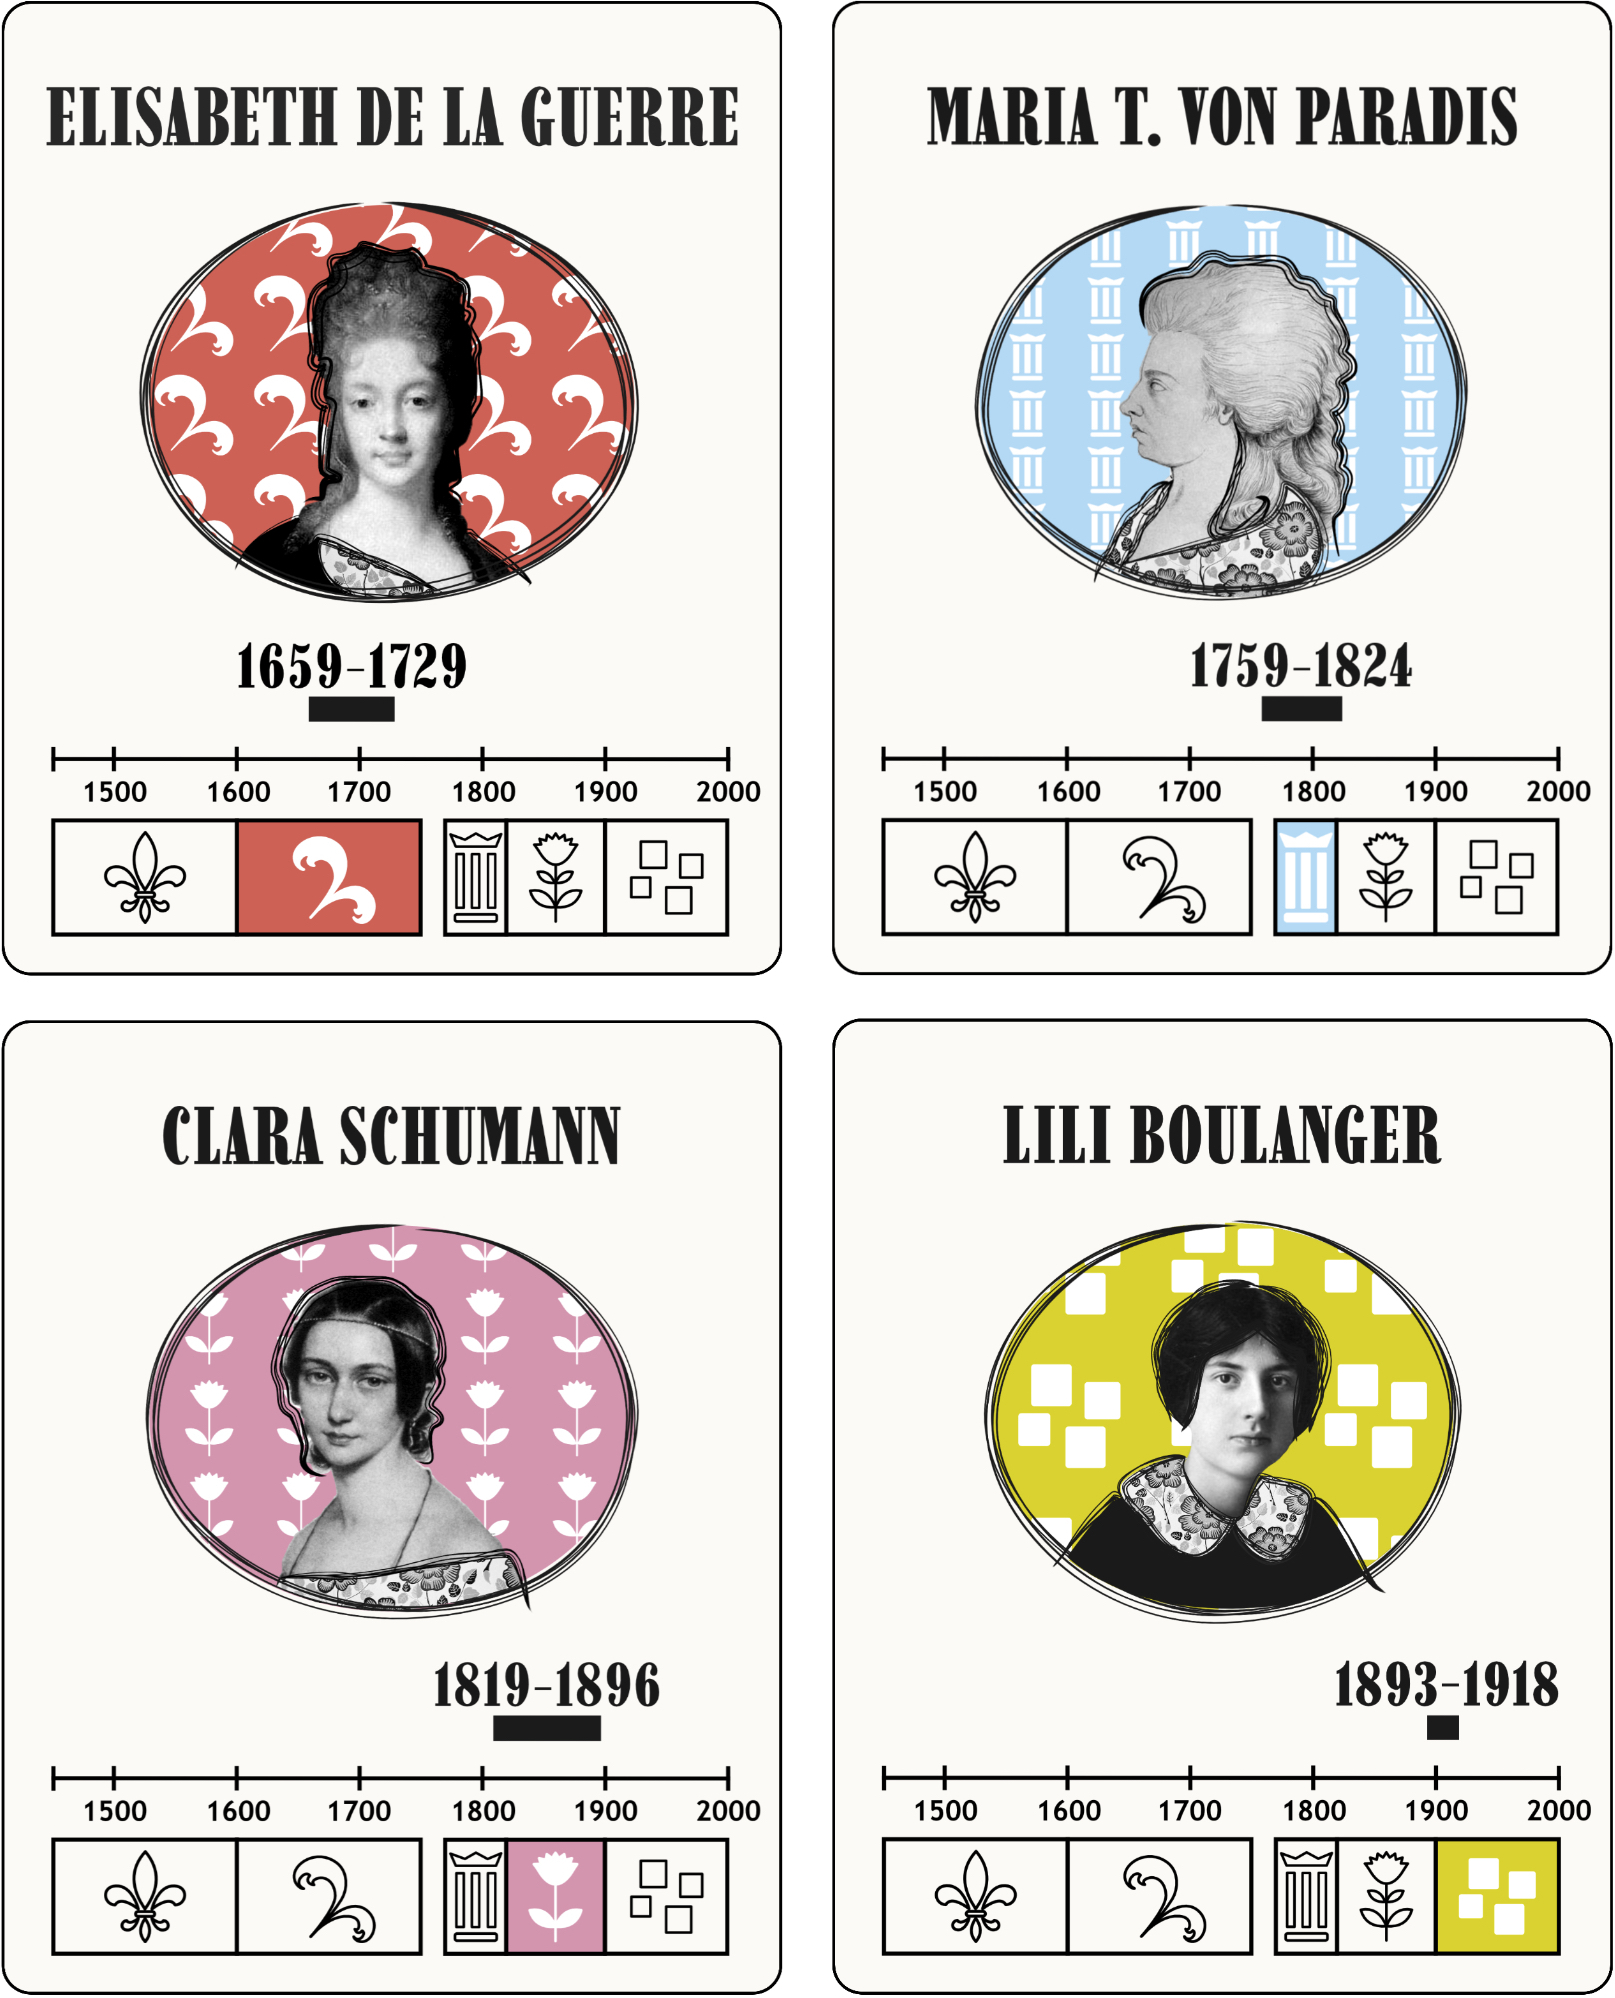 Four cards displaying portraits of women composers, their lifespan, and style era.